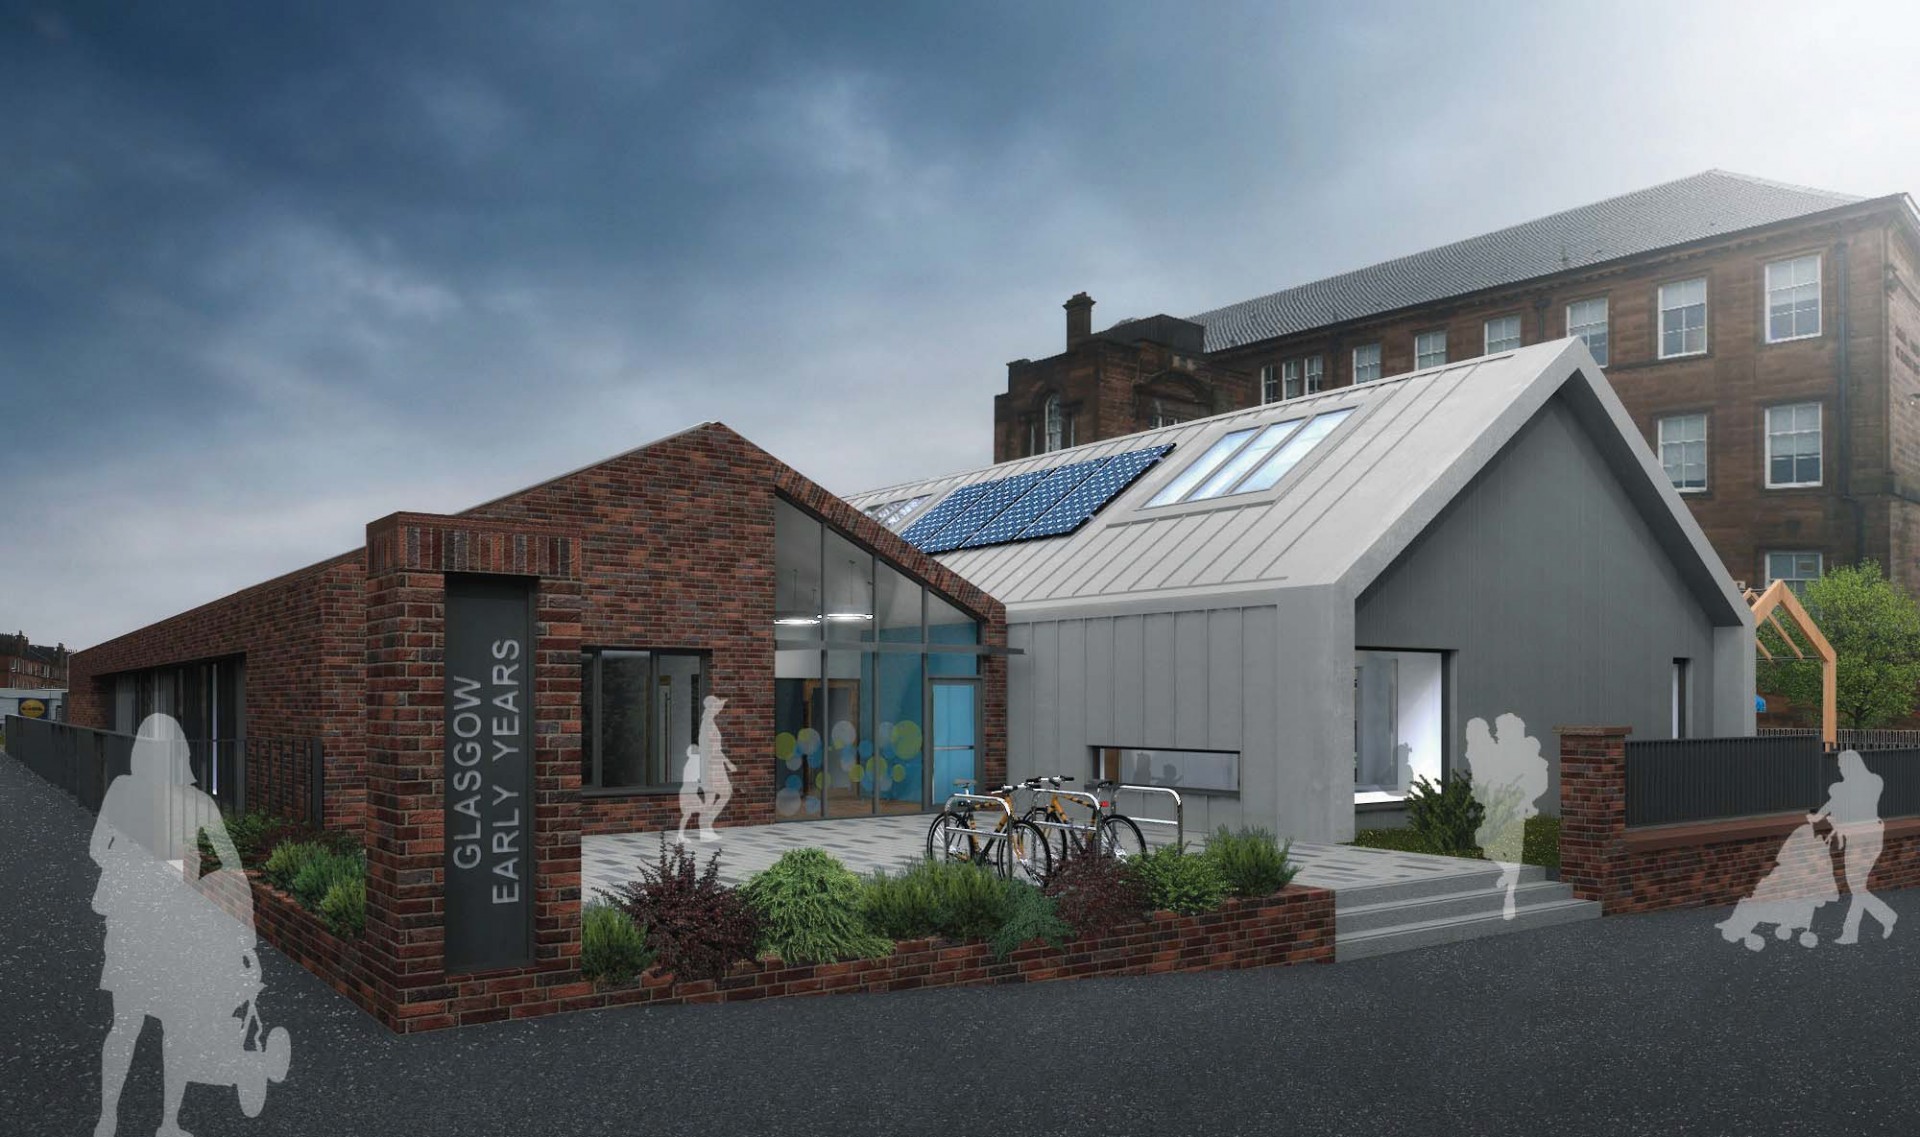 Plans lodged for two new nurseries in Glasgow